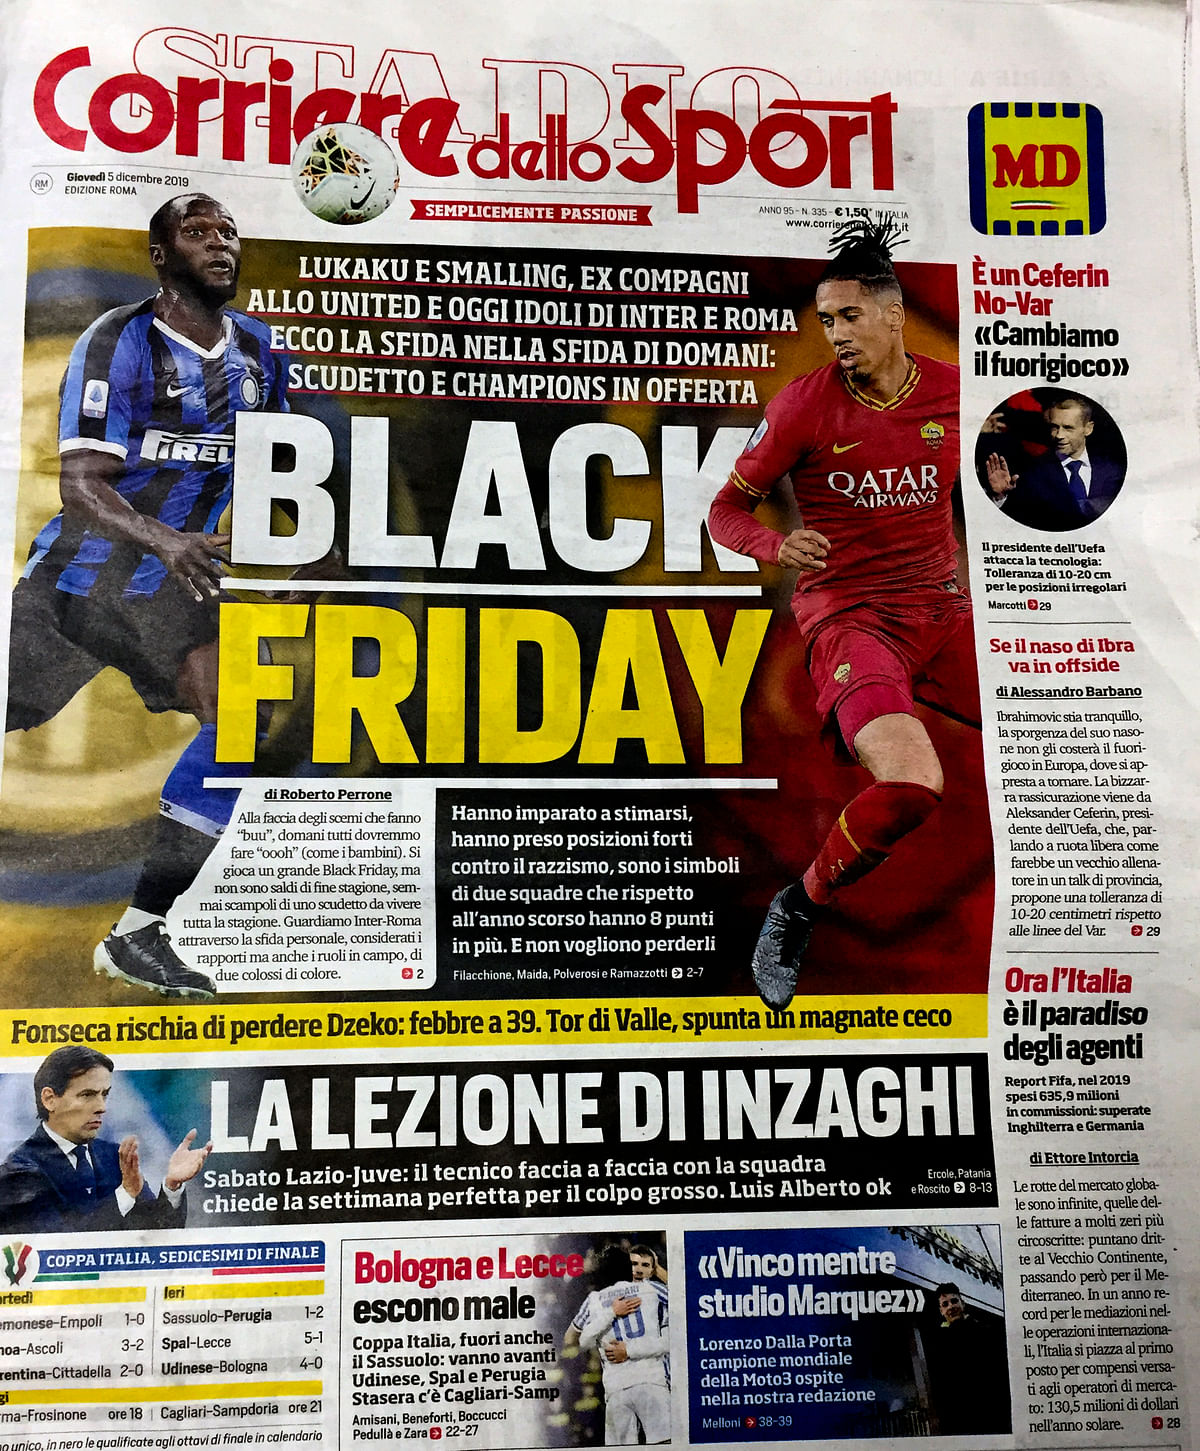 Corriere dello Sport faced criticism for a “Black Friday” headline featuring 2 black soccer players on the cover.